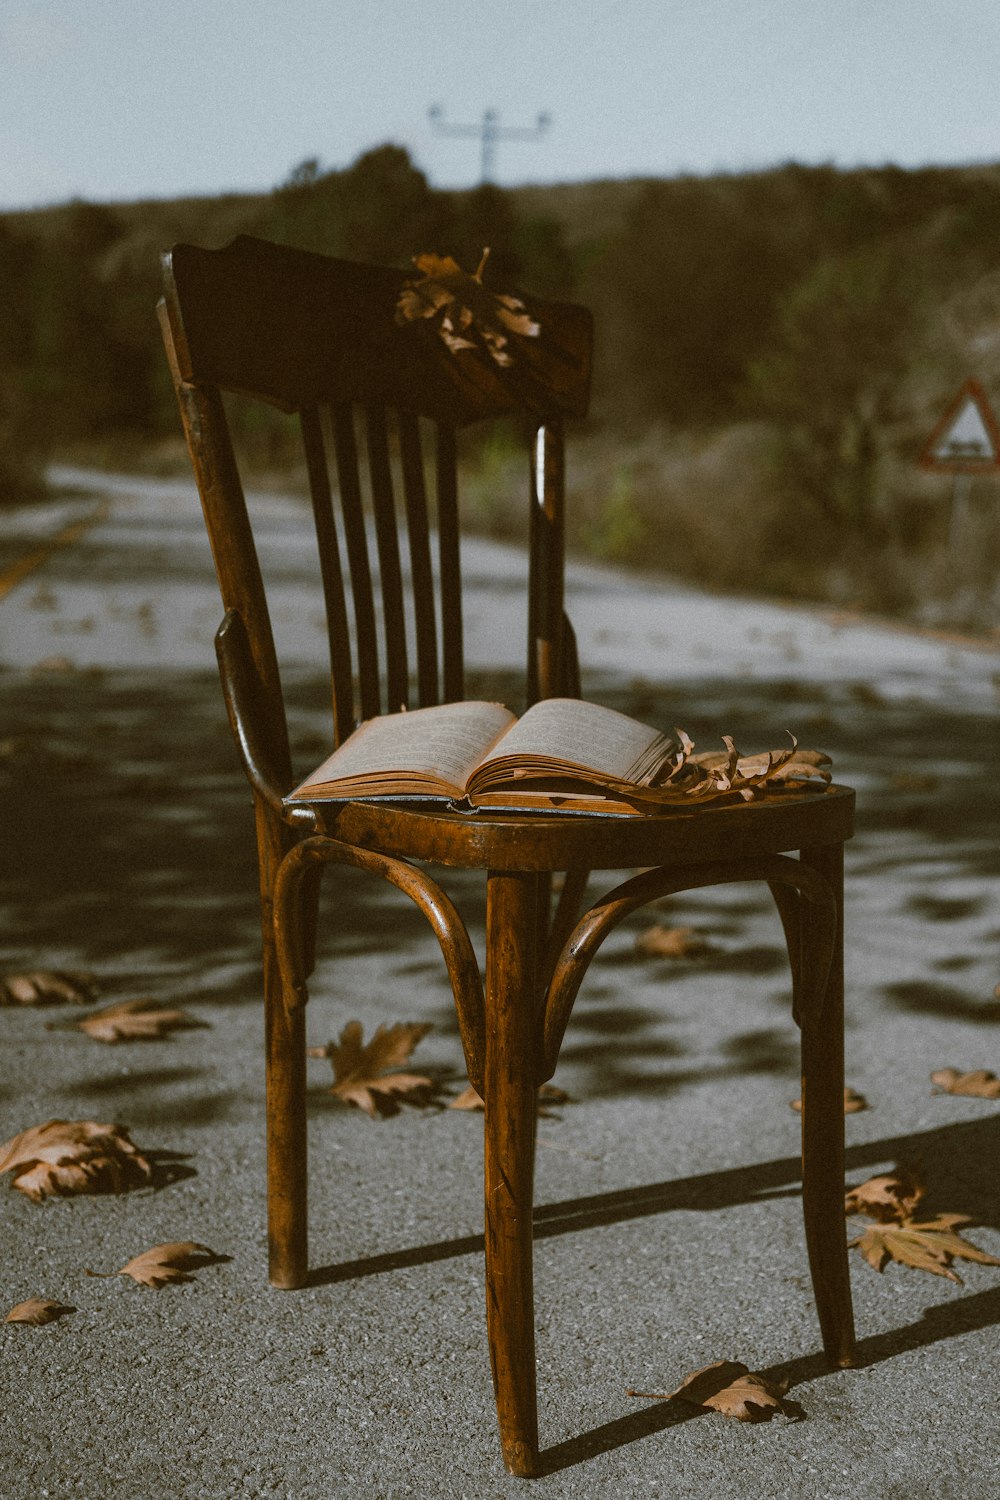 a wooden chair with an open book on it